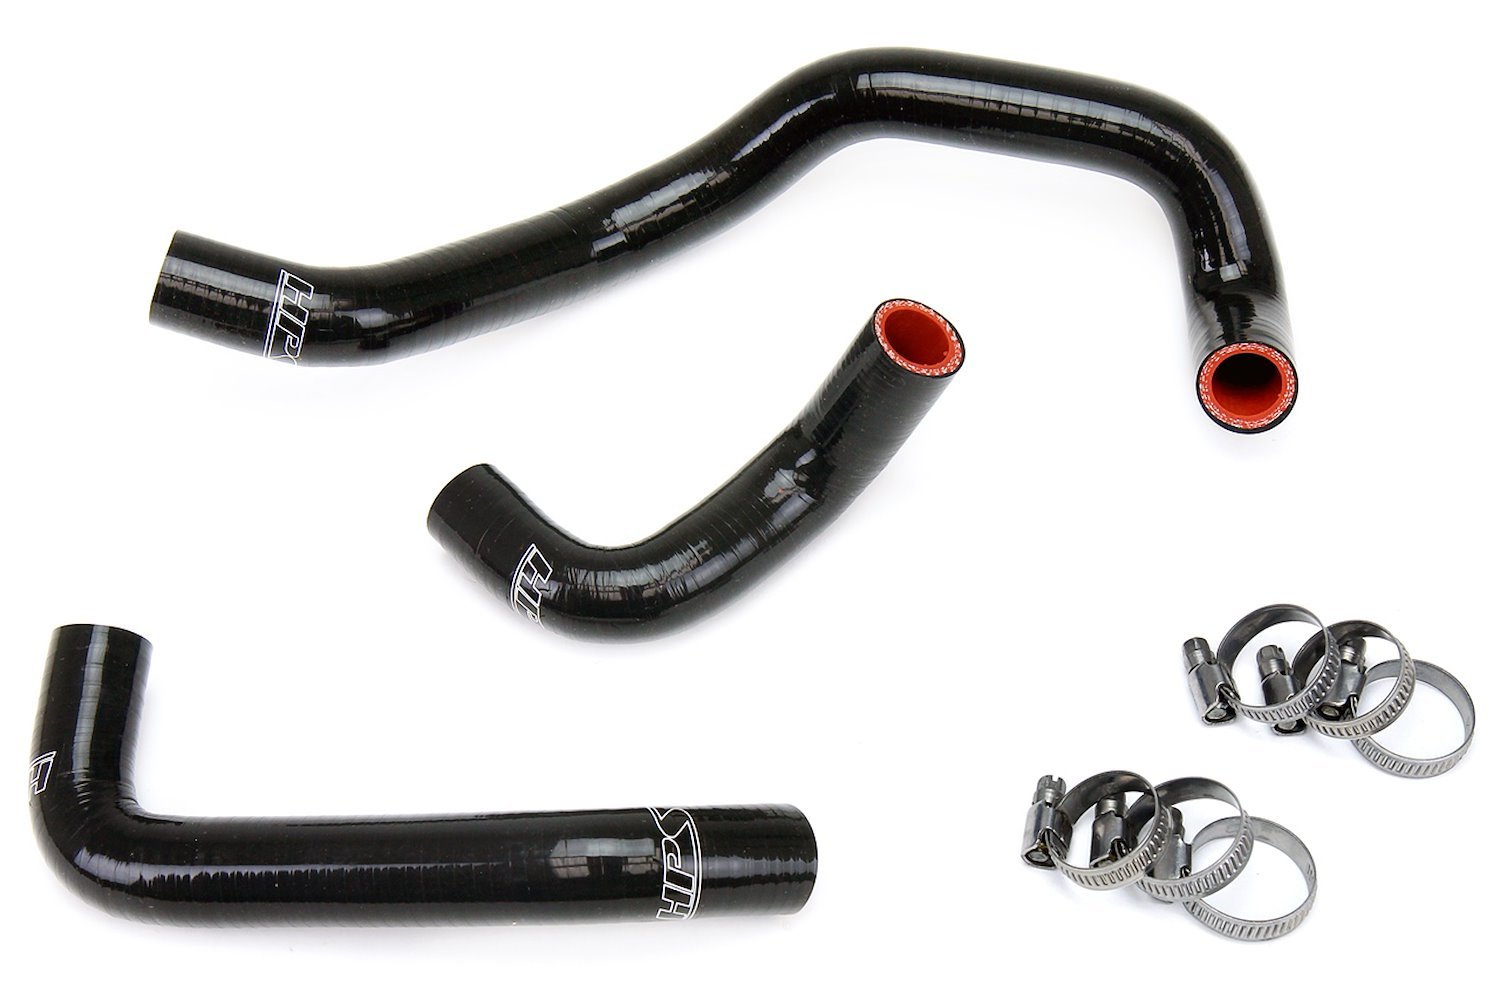 57-1397-BLK Heater Hose Kit, High-Temp 3-Ply Reinforced Silicone, Replace OEM Rubber Heater Coolant Hoses